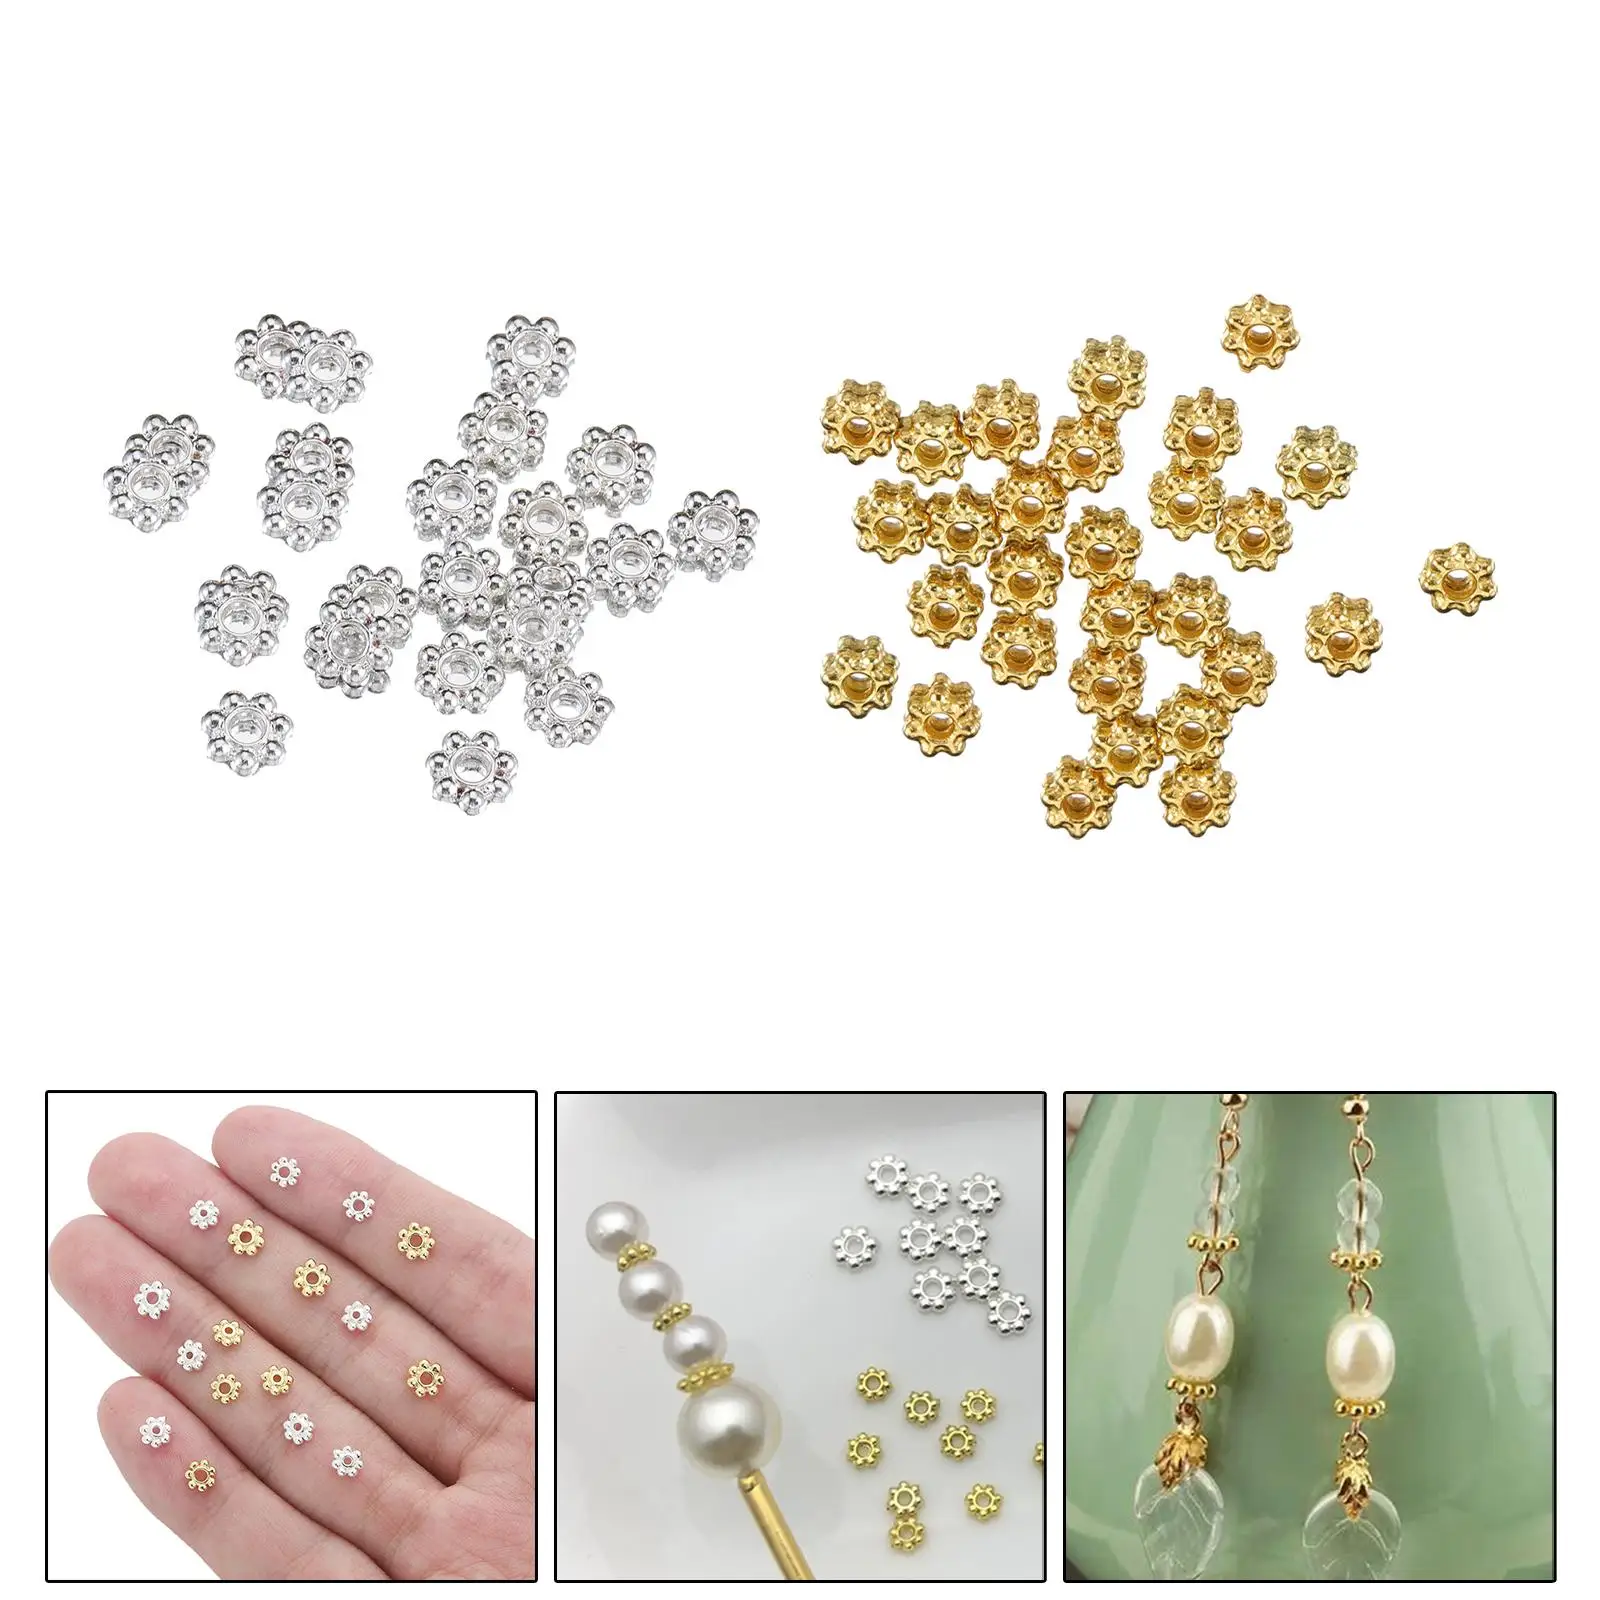 200Pcs Snowflake Spacer Beads Set DIY Decorative Copper Loose Beads for Jewelry Making Findings Bracelet Rings Earring Pendants